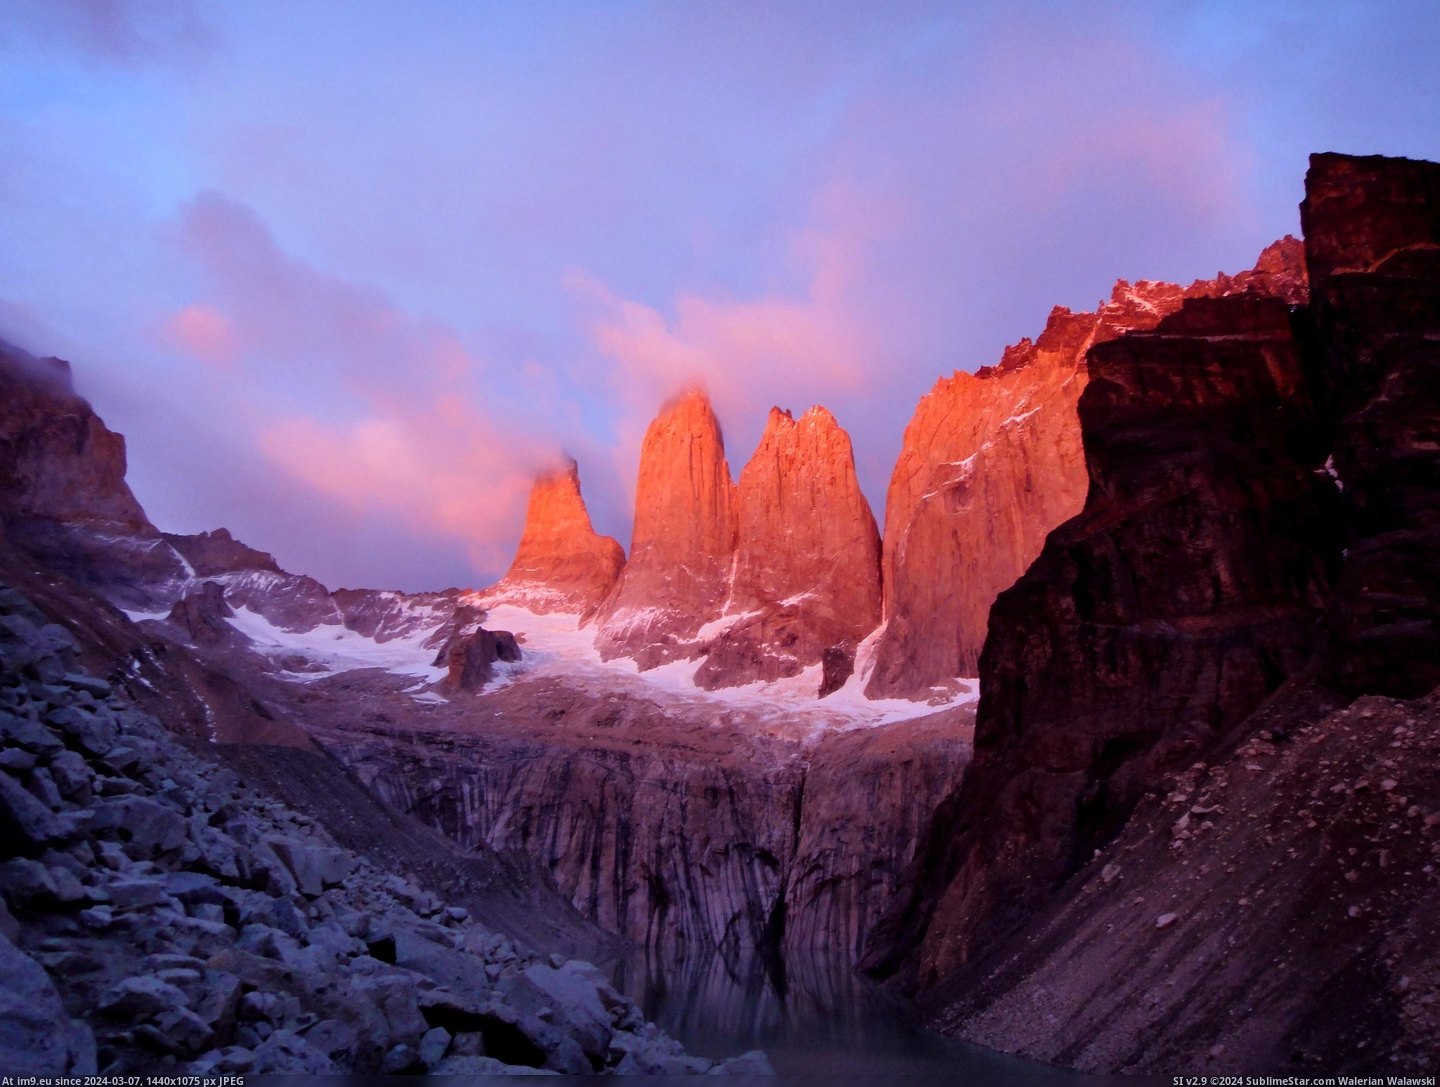 #Did #Place #Point #Sunrise #Hitting #Torres #Paine #Justic #Shoot #Famous #Del #Patagonia [Earthporn] Sunrise hitting the famous Torres del Paine in Patagonia. Not sure my little point & shoot did this place justic Pic. (Image of album My r/EARTHPORN favs))